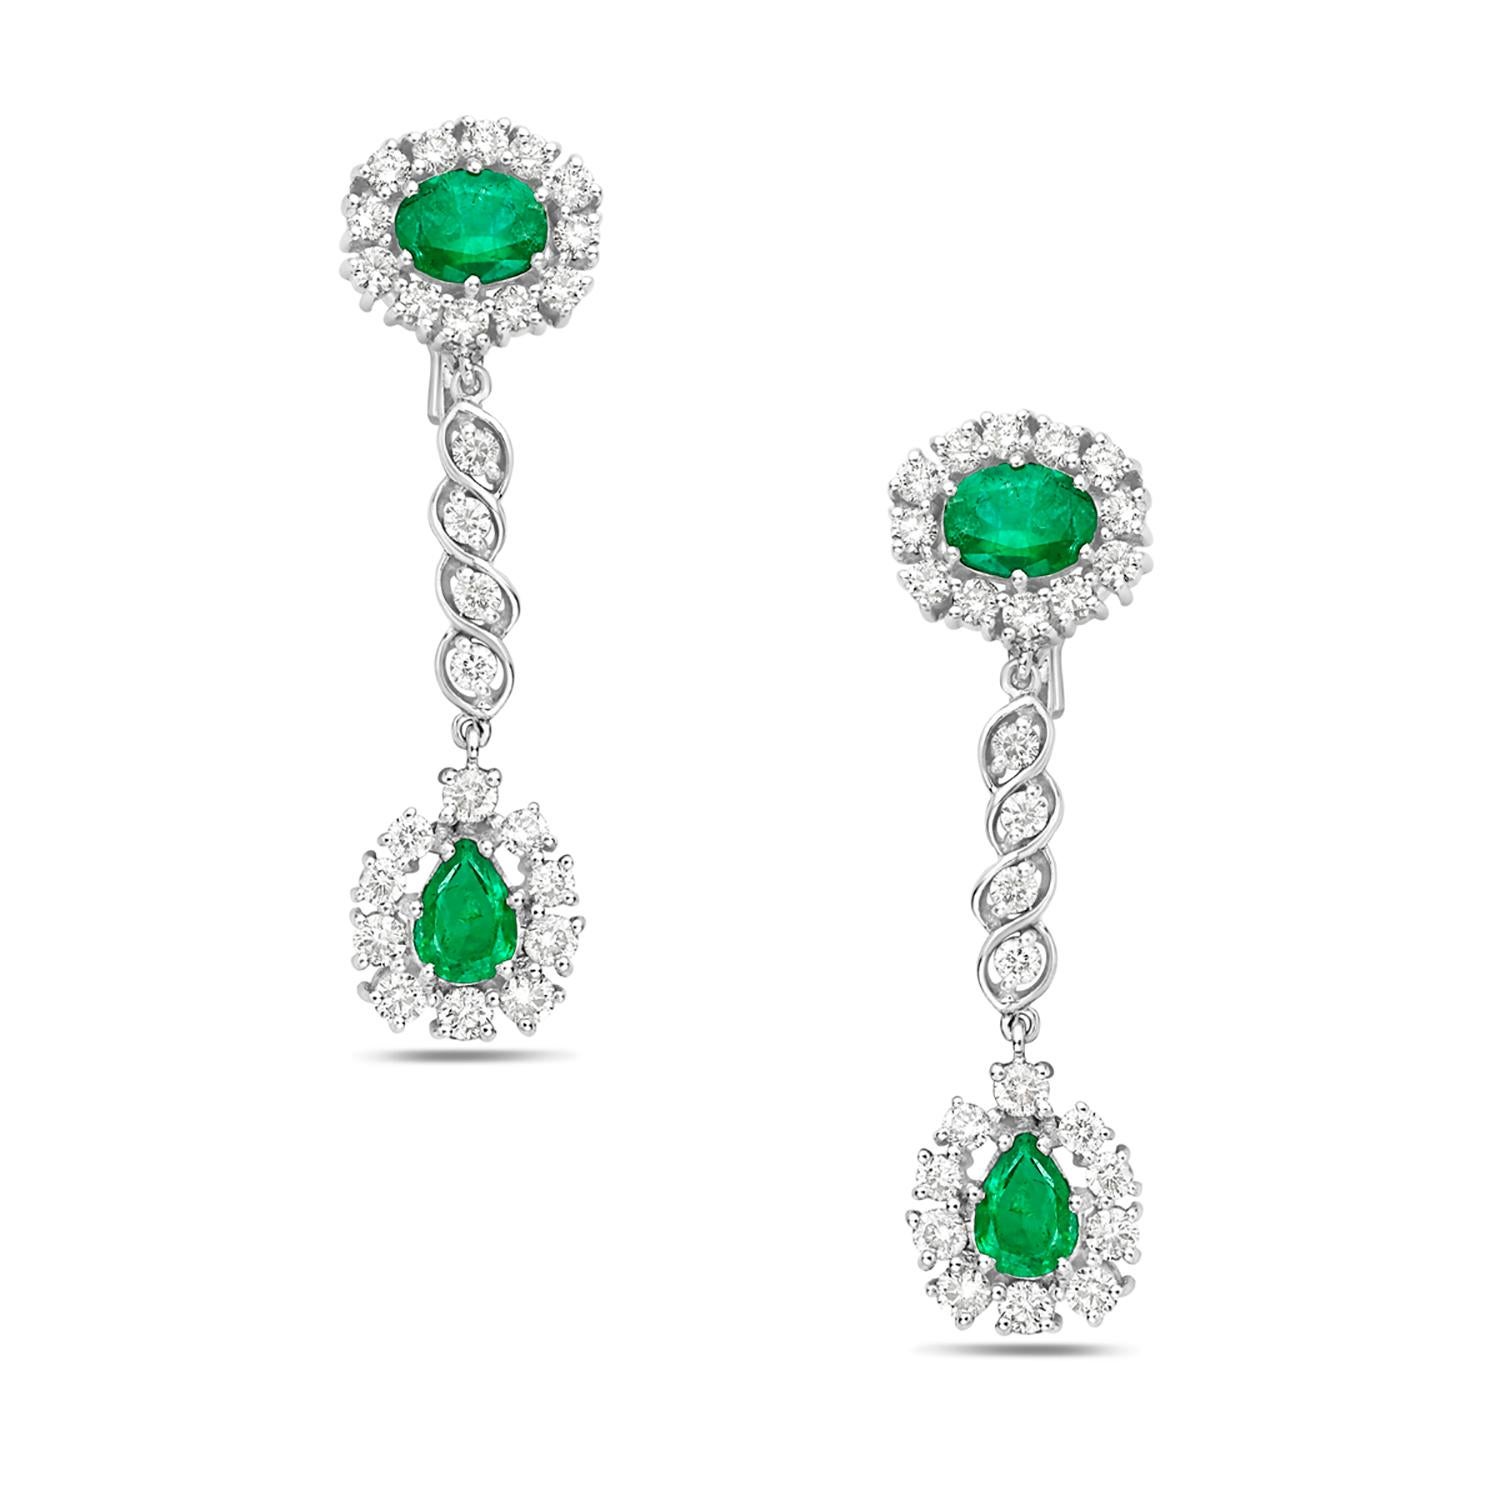 Mixed Cut Multi Shaped Emerald Earrings with Brilliant Cut Diamonds Made in 18k White Gold For Sale